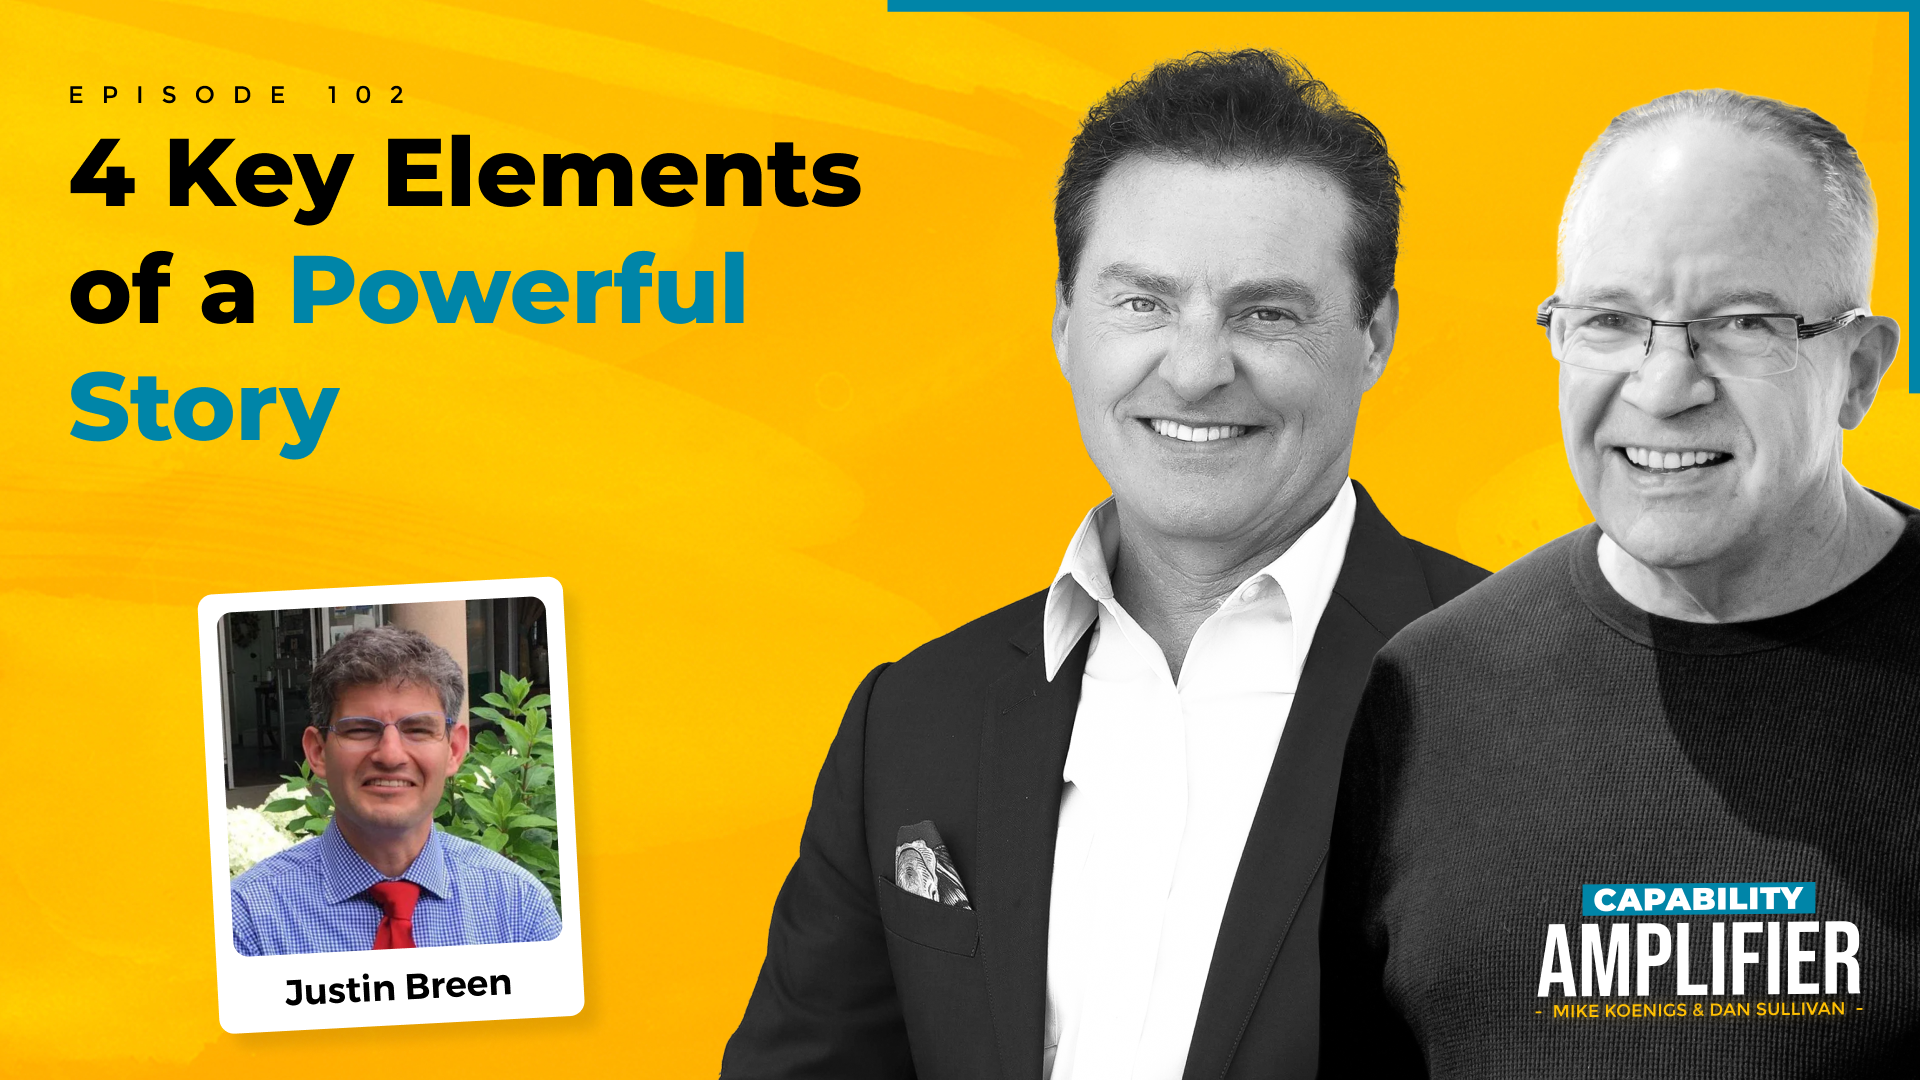 4 Key Elements of a Powerful Story with Mike Koenigs and Justin Breen